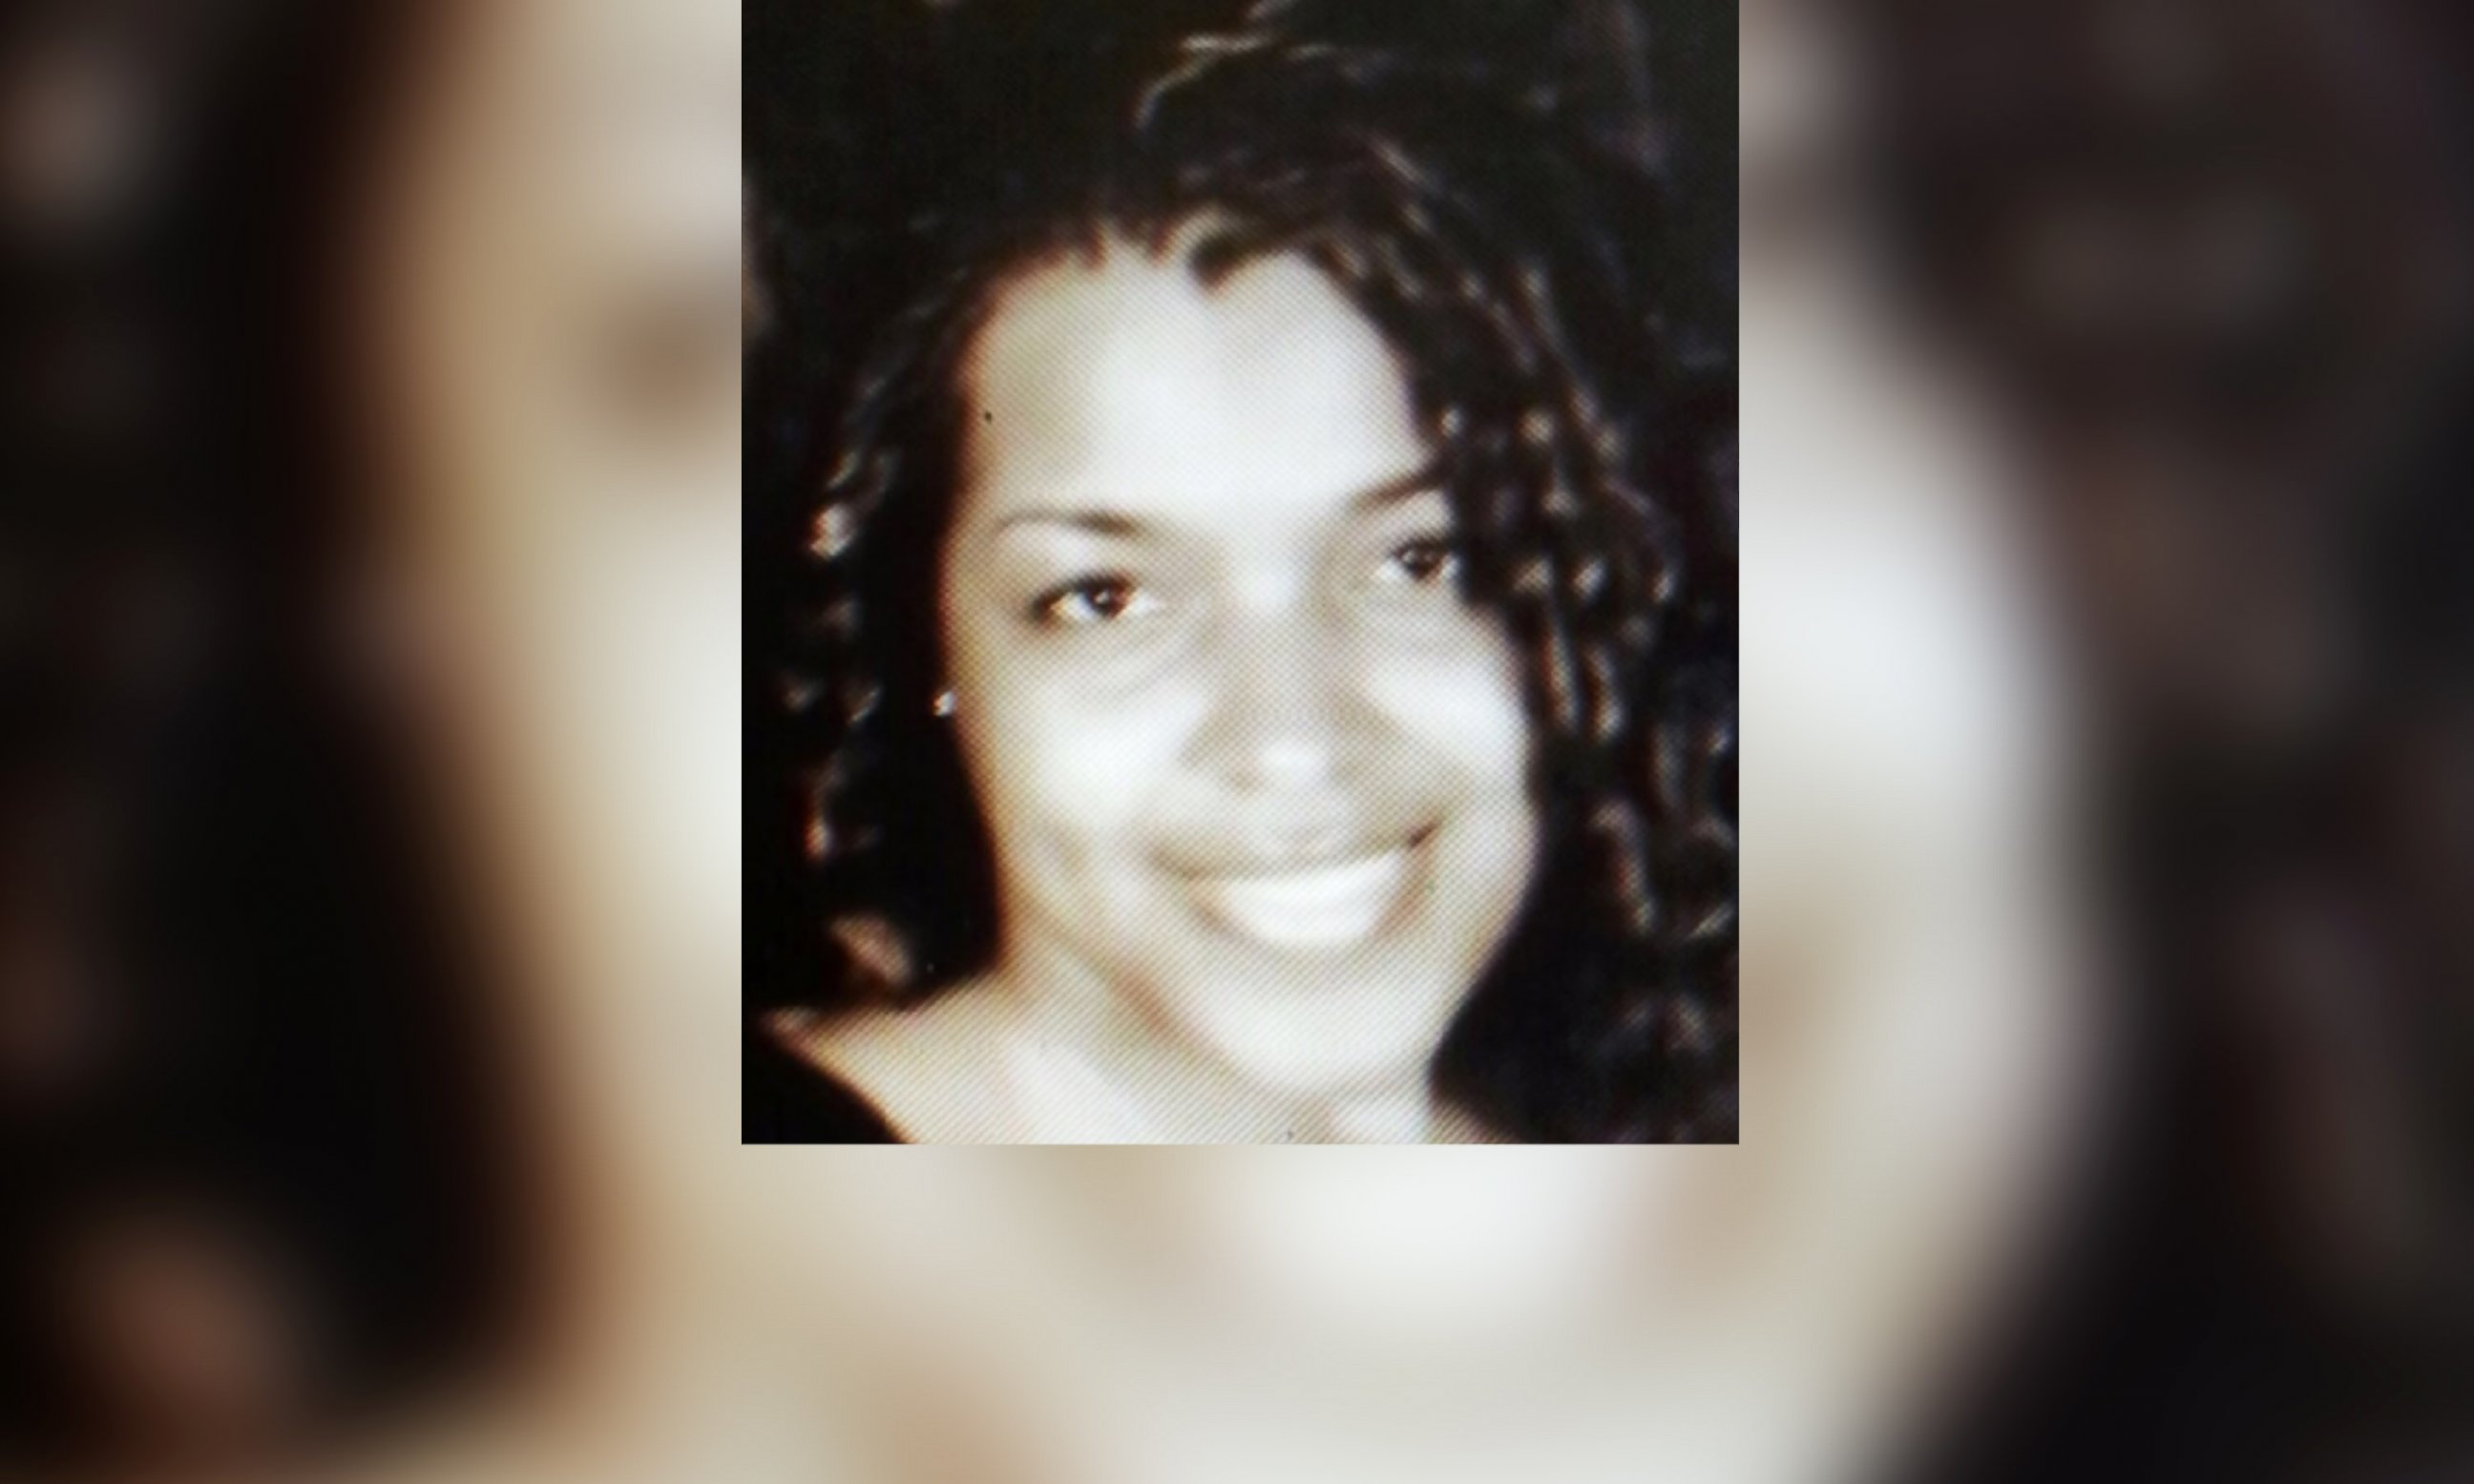 PHOTO: Amber Vinson, a nurse seen here in an undated family photo, was diagnosed with Ebola after caring for Thomas Eric Duncan at Dallas' Texas Health Presbyterian Hospital.